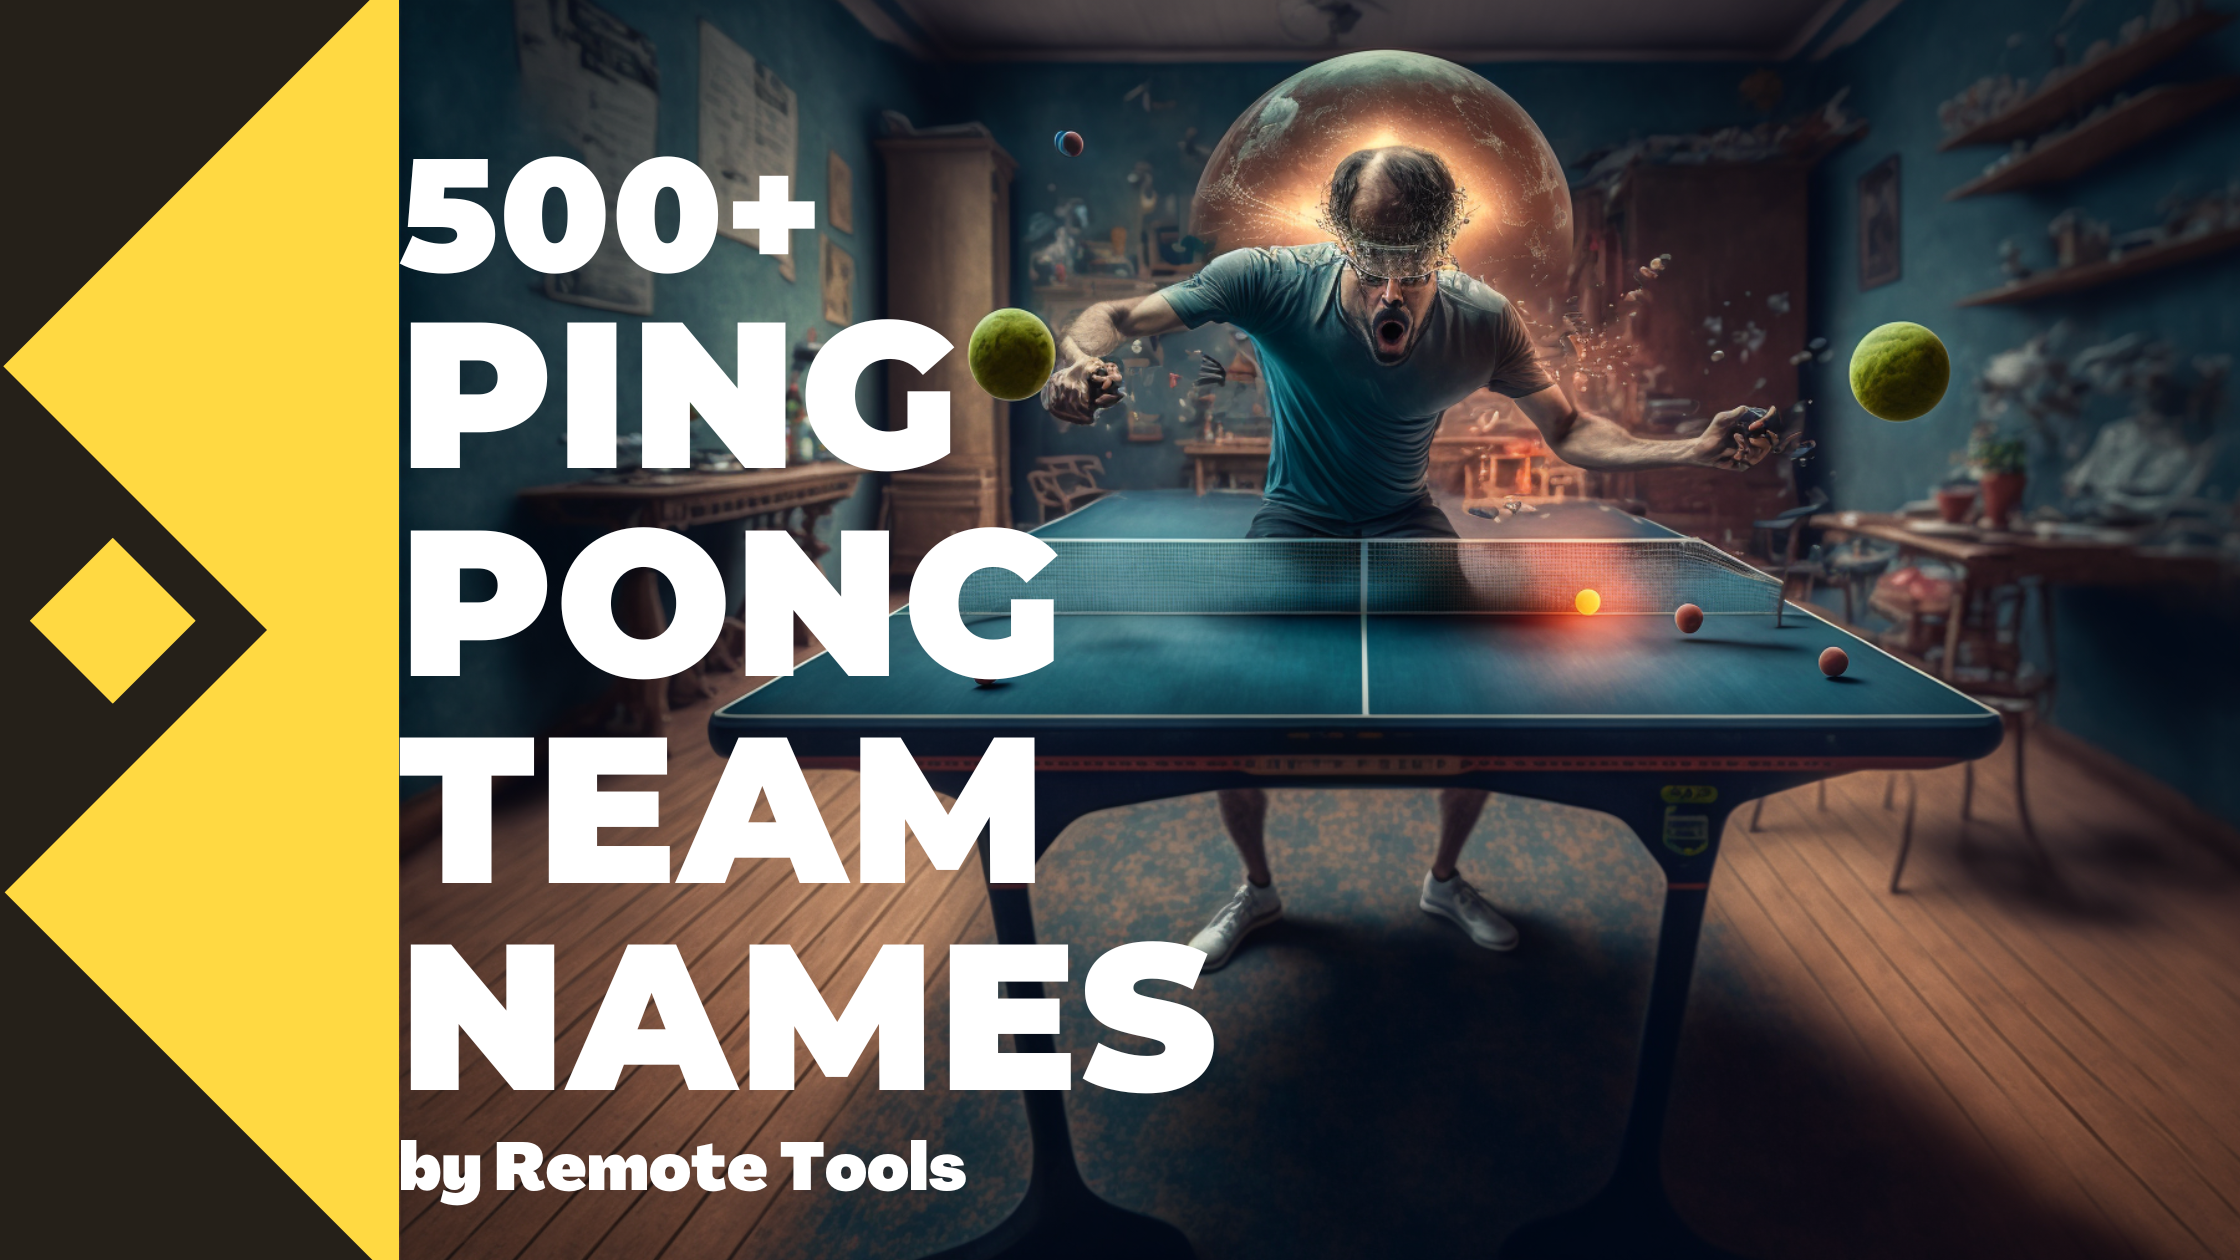 Remote.tools shares 500+ team names for ping pong